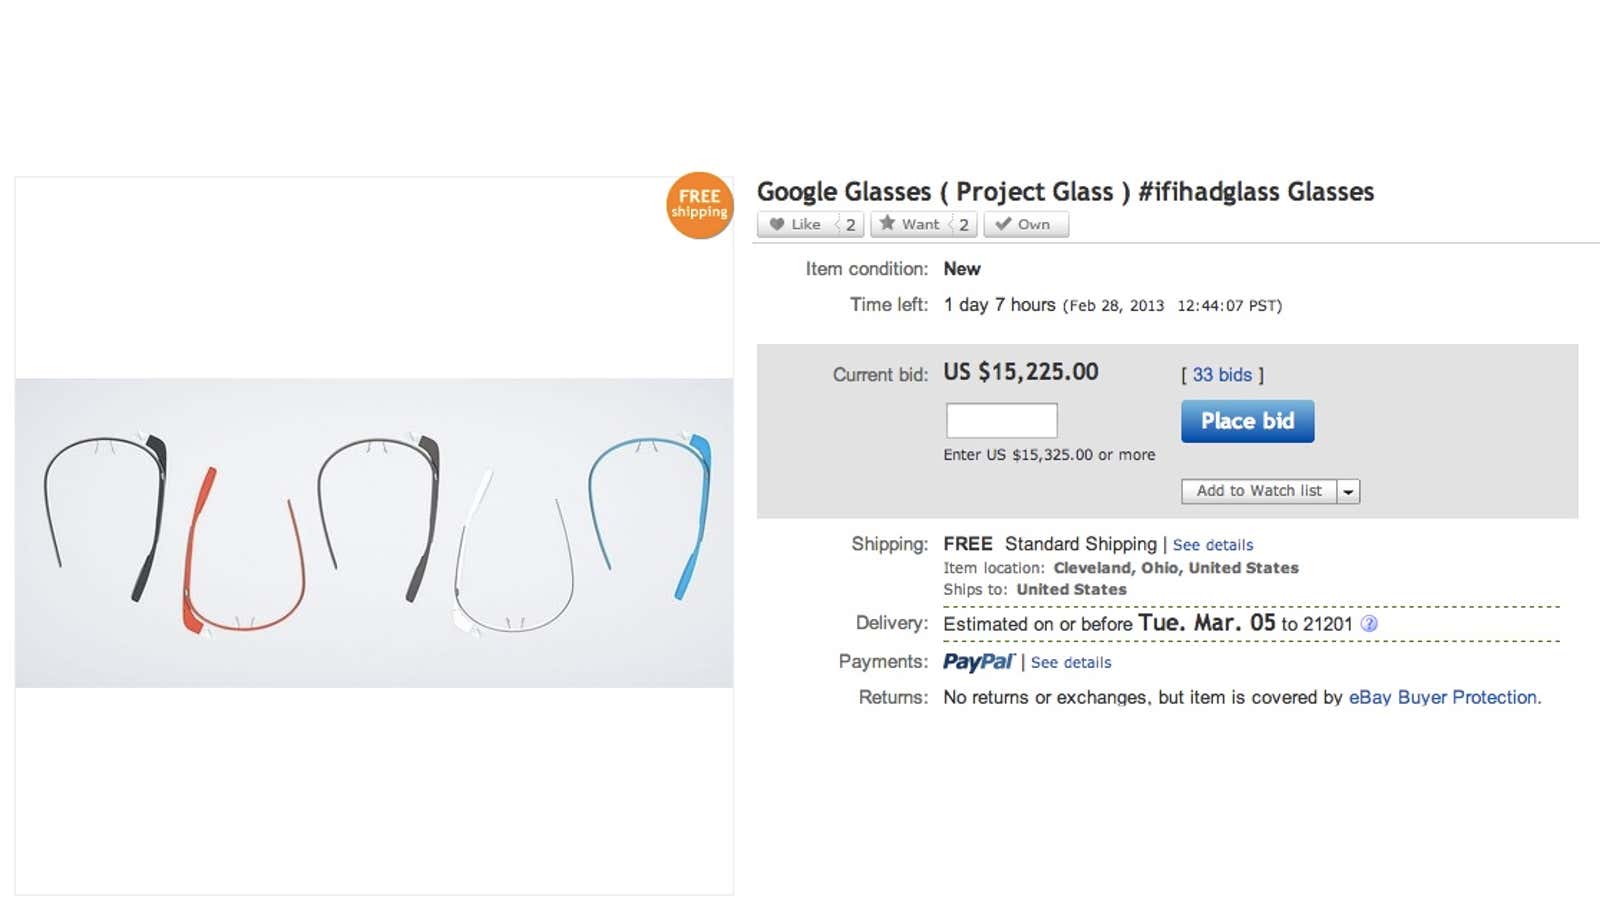 This is probably not the way to be the first non-Google employee to get Glass.